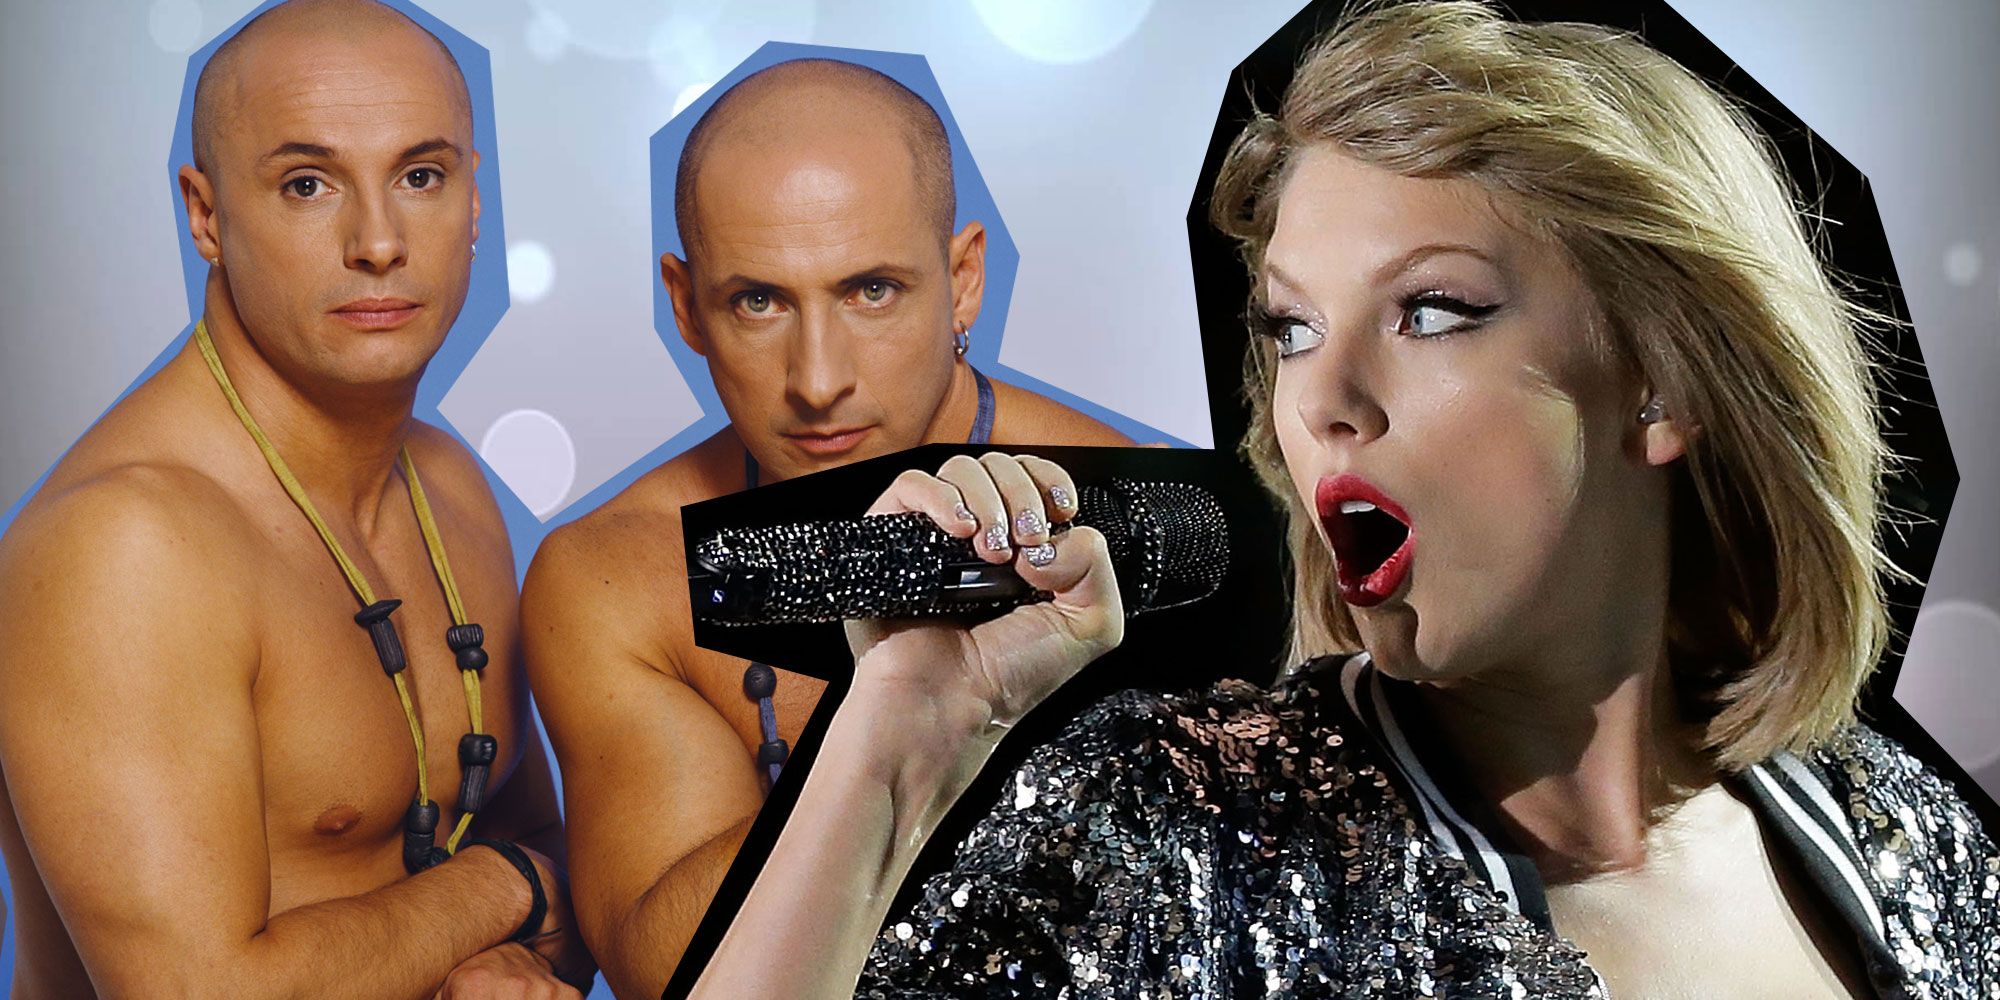 14 Huge Songs That Basically Sound The Same As Another